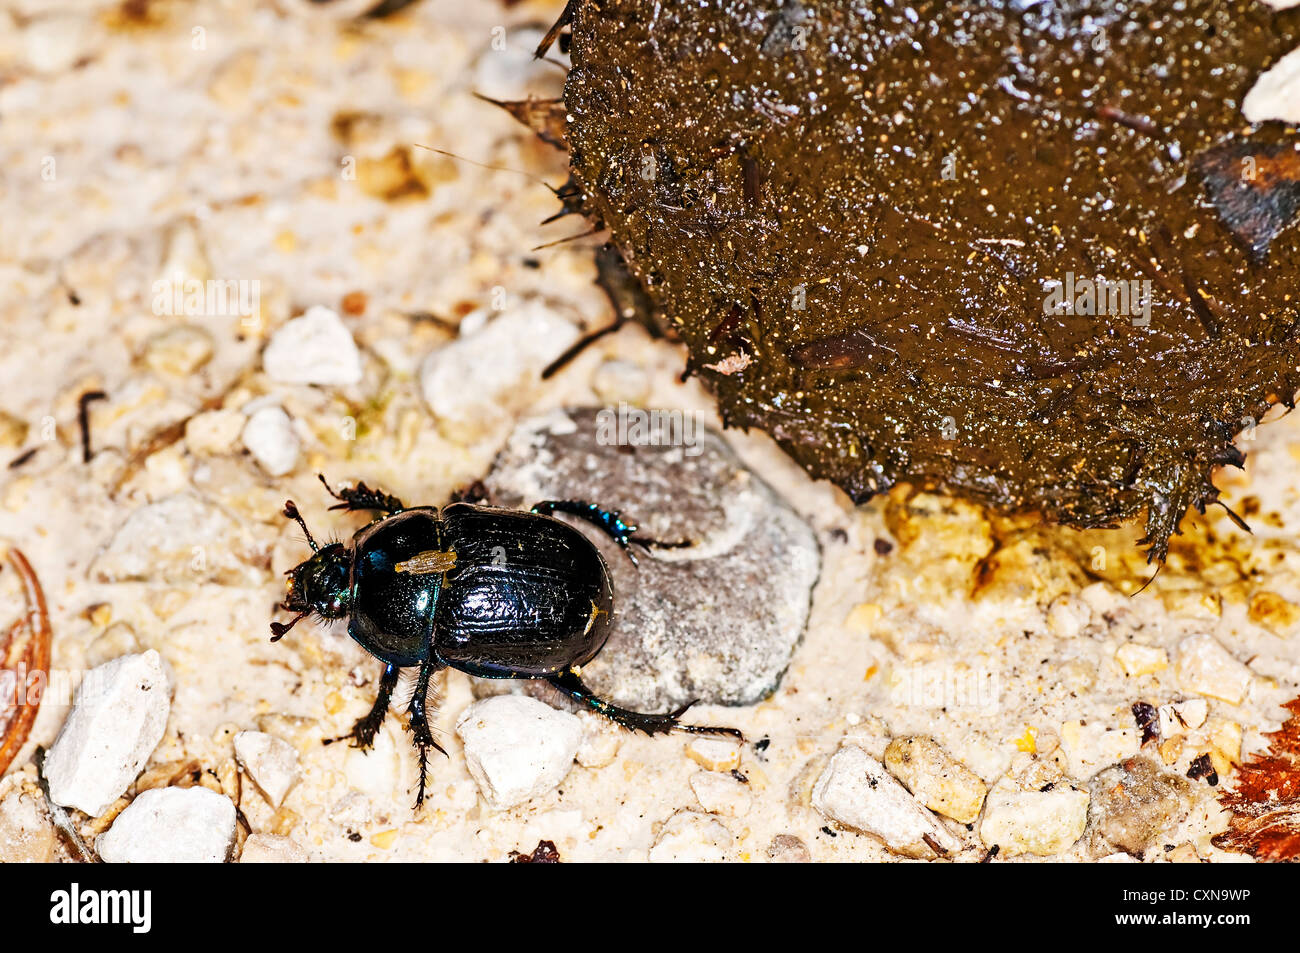 Dung beetle Geotrupes stercorosus Scr. Stock Photo